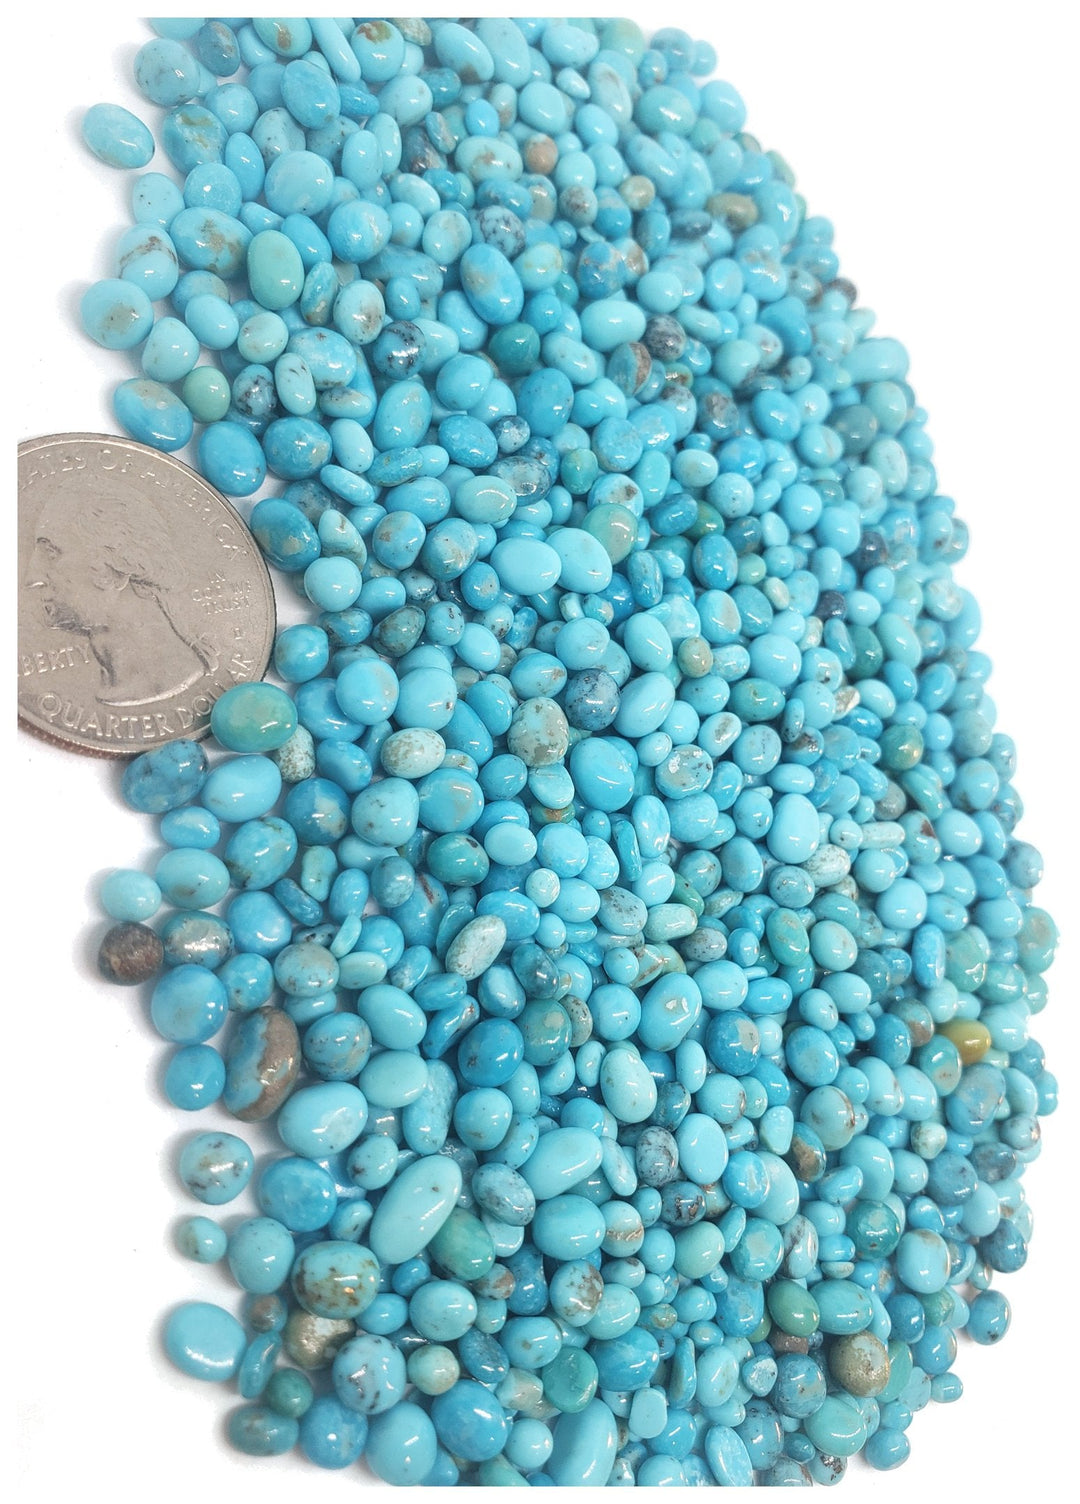 Nacozari (Mex) Turquoise Rounded Small Tumbled Nuggets for 